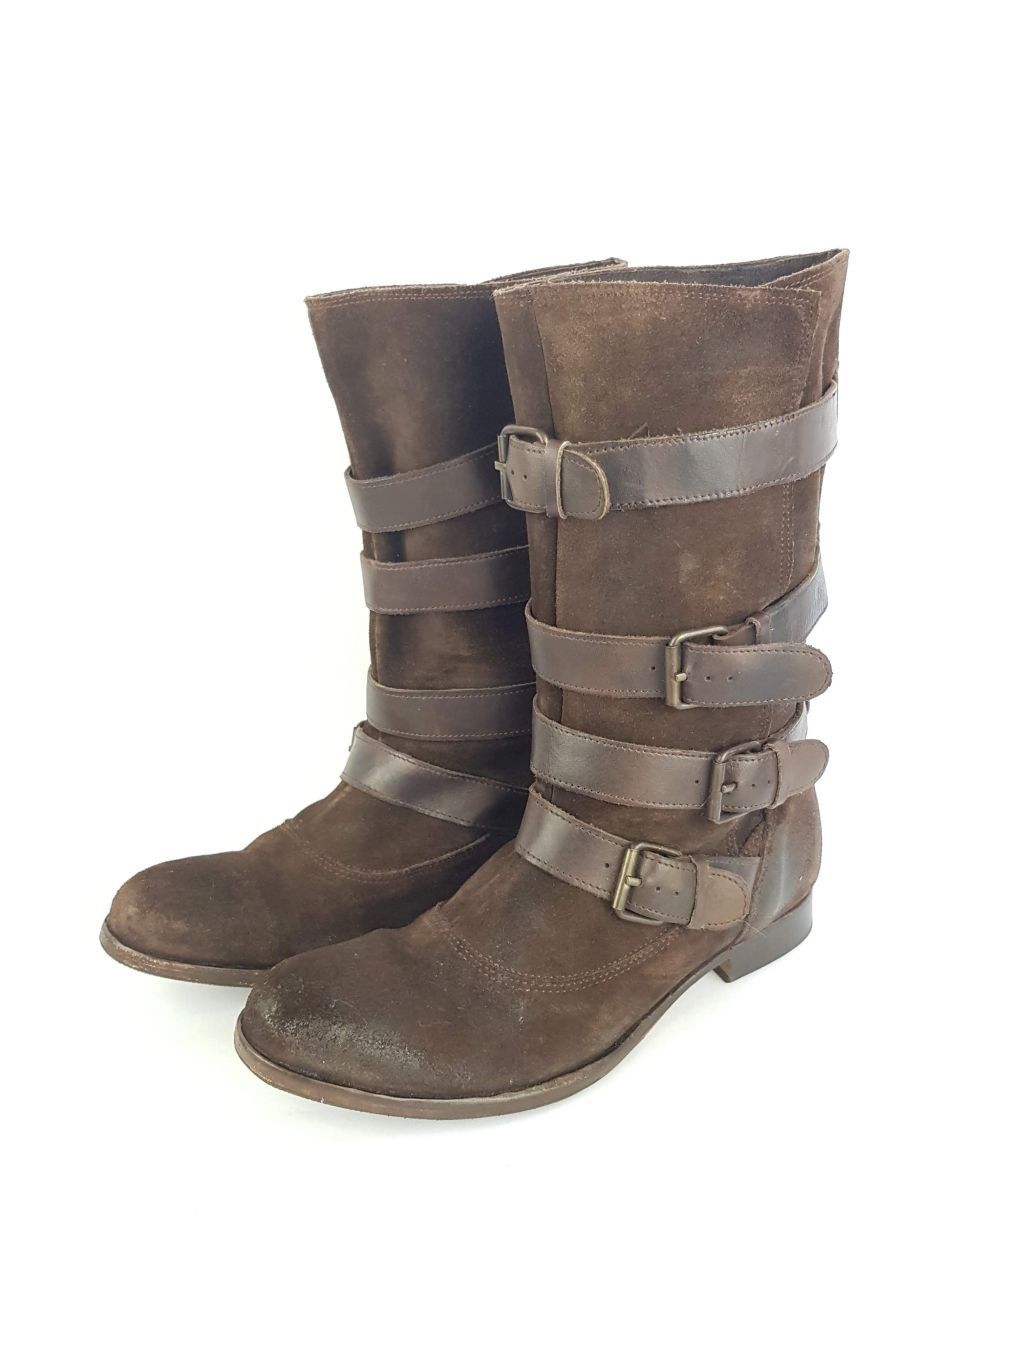 H By Hudson Brown Suede Calf Boots Preloved - Buy from My Ex Wardrobe, Exeter, Devon, UK